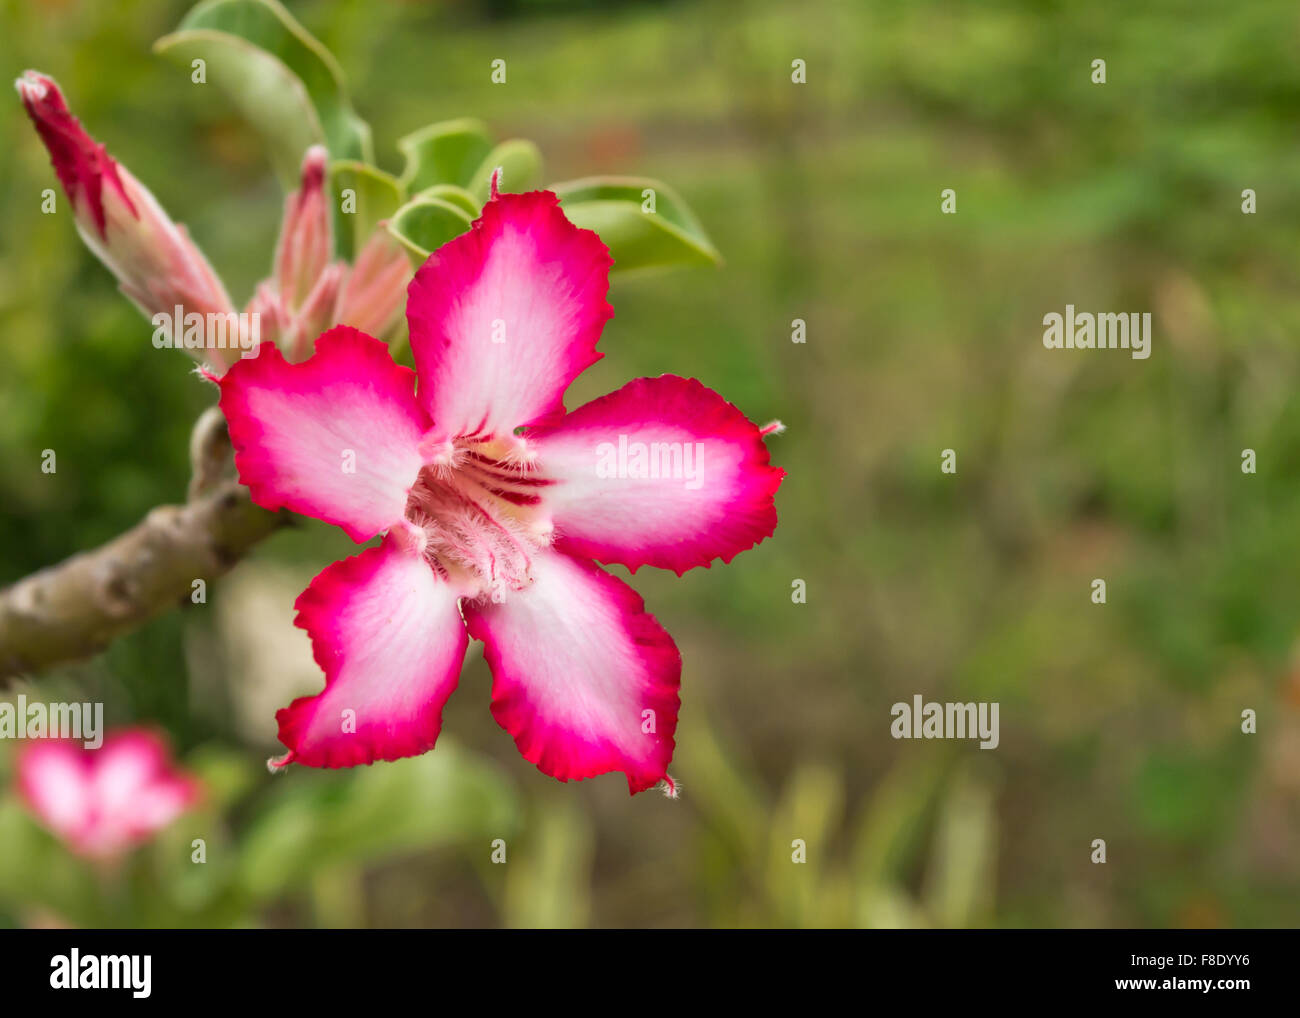 Impala lily, flower and flower bud, in nature in South Africa. Stock Photo